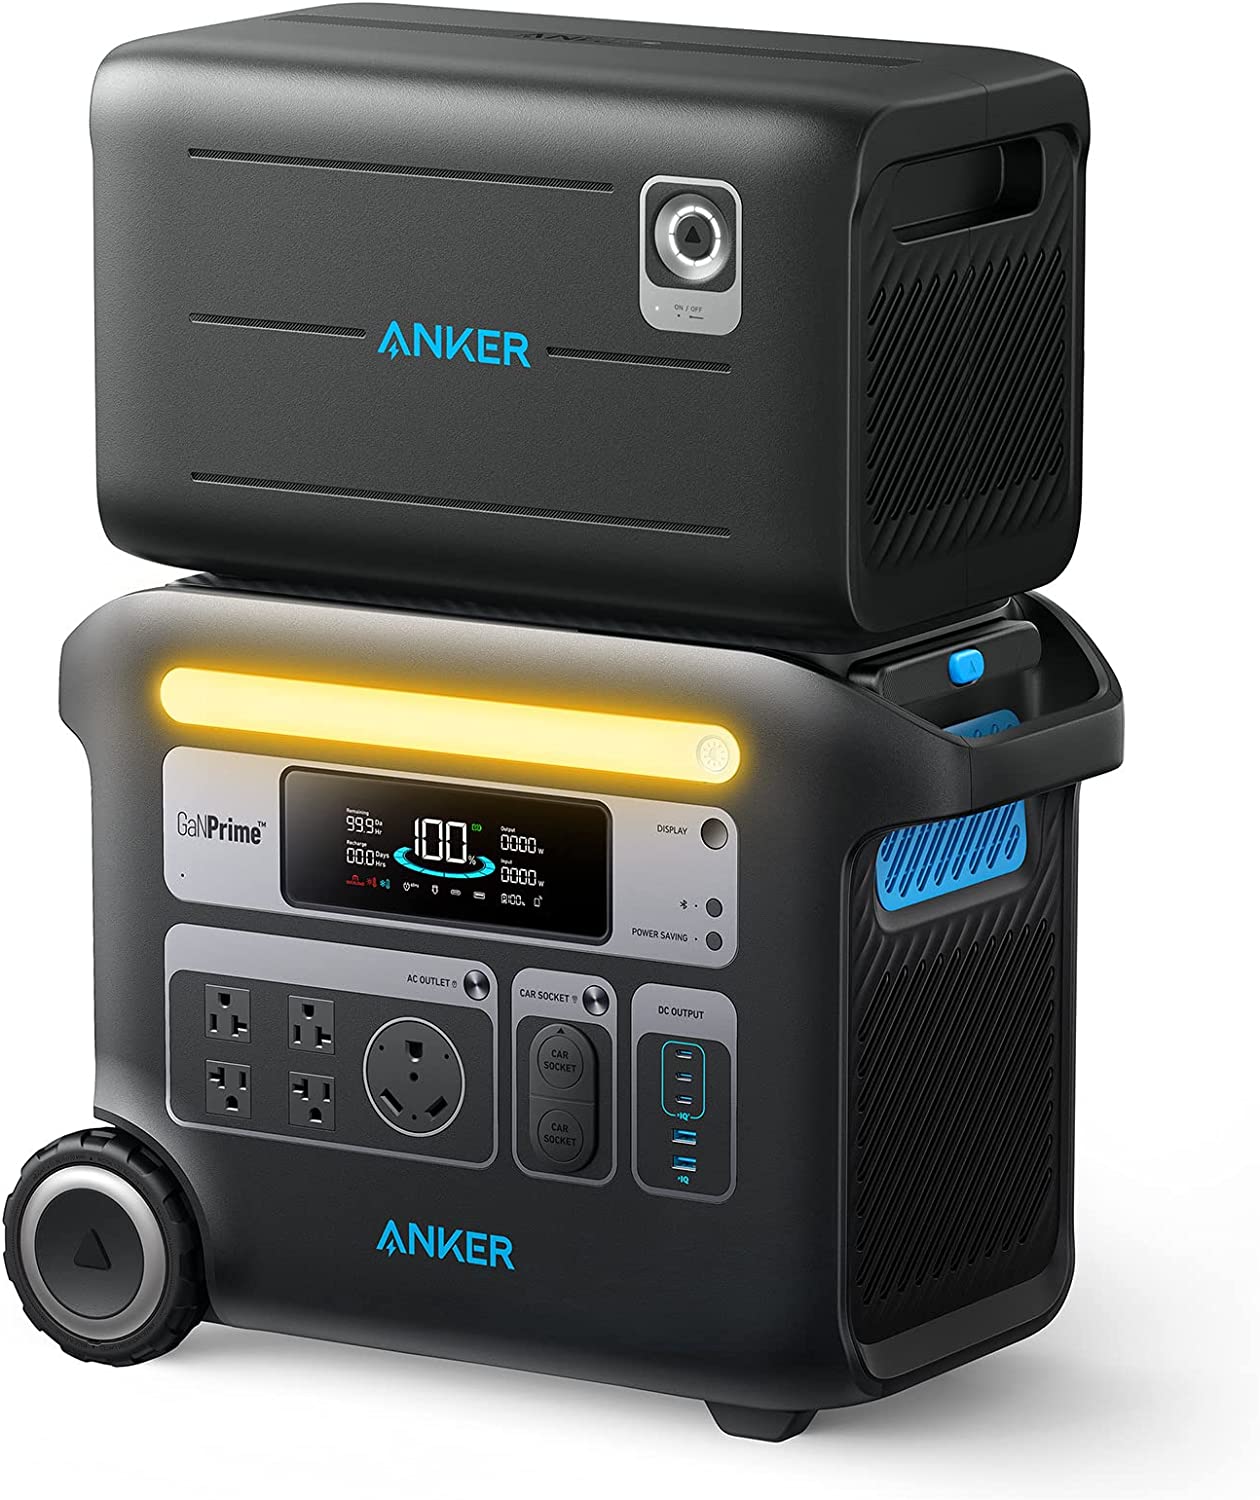 Anker 767 Power Station and 760 Expansion Battery (4096Wh LiFePO4 Battery with 4 AC Outlets Up to 2400W) $2600 + Free Shipping